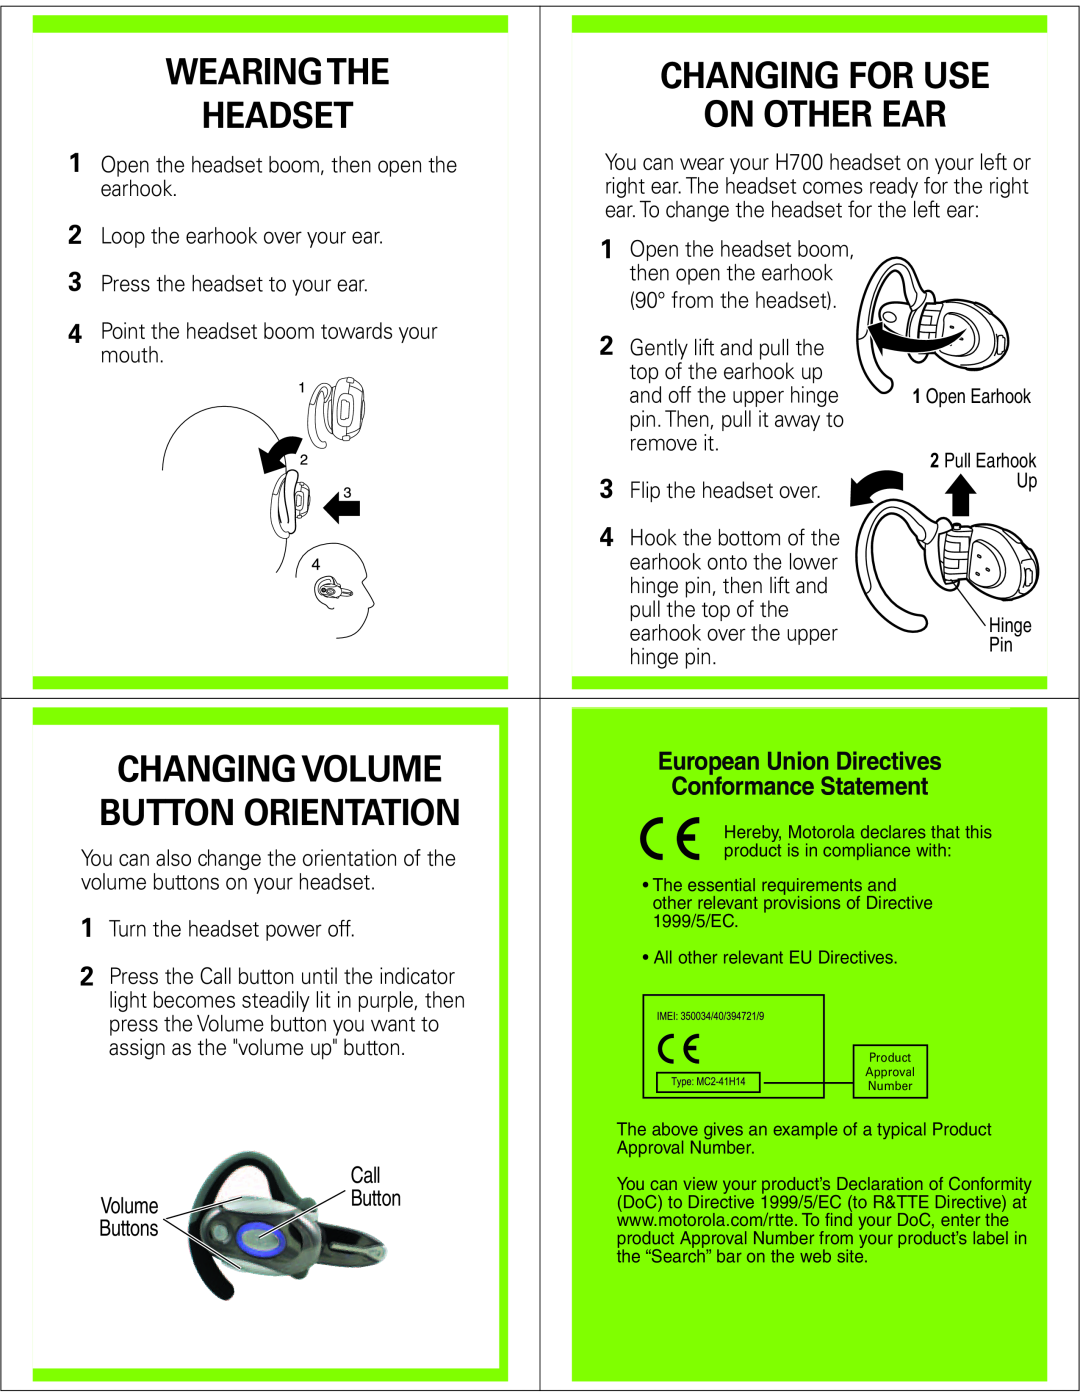 Motorola H700 manual Wearing The, Changing For Use, Headset, On Other Ear, Changing Volume, Button Orientation 